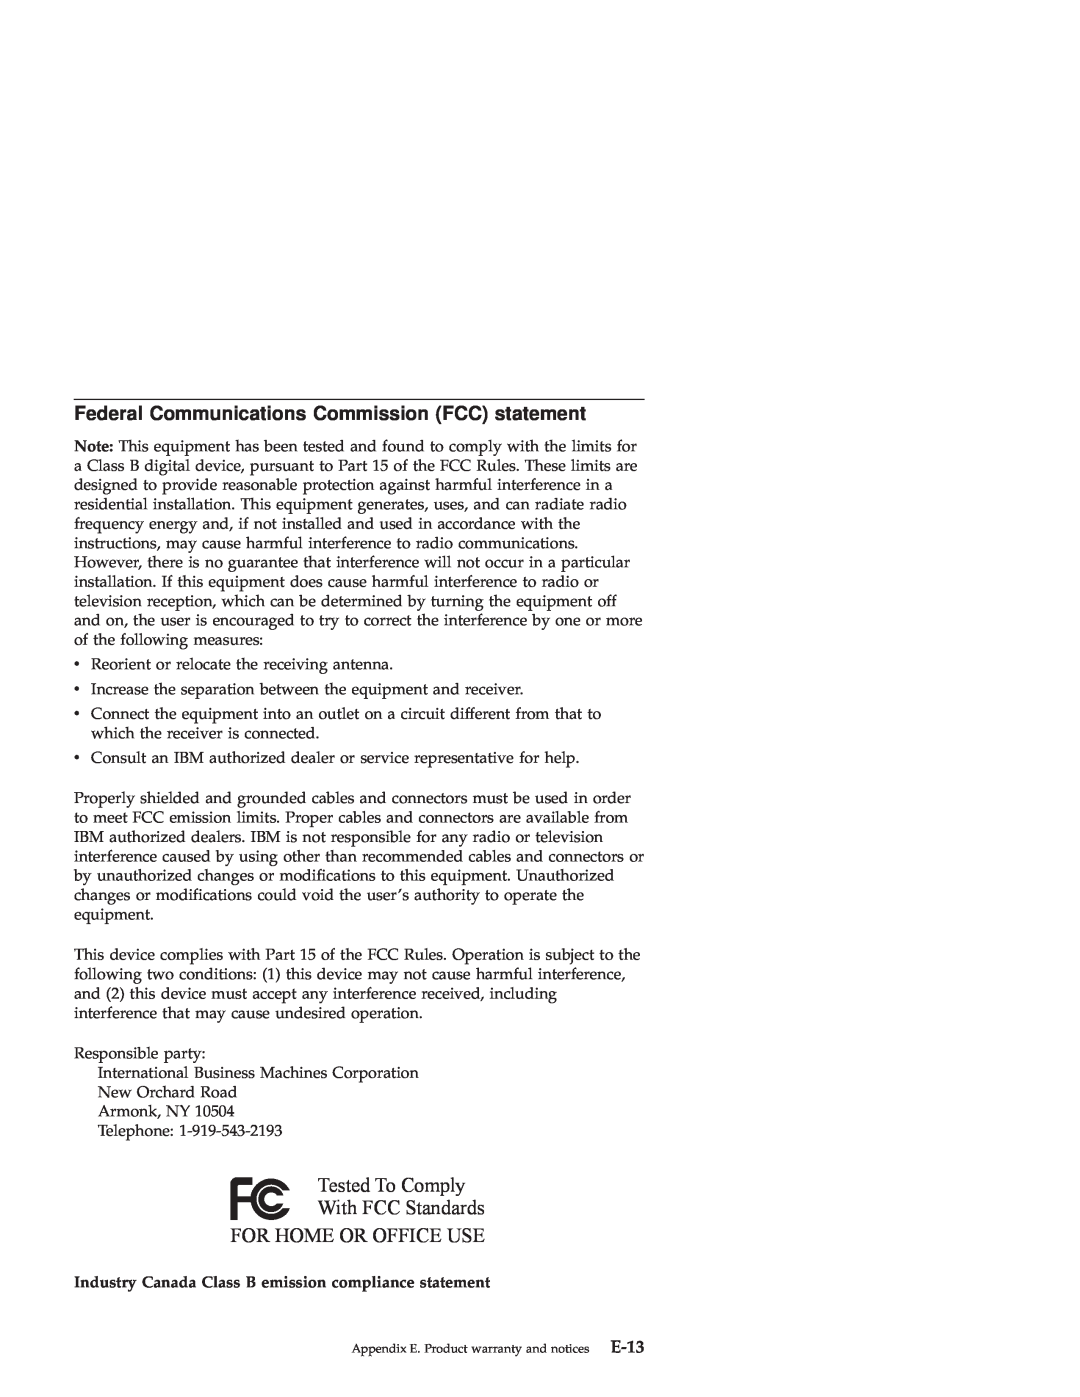 IBM 71P7285 Federal Communications Commission FCC statement, Tested To Comply With FCC Standards FOR HOME OR OFFICE USE 